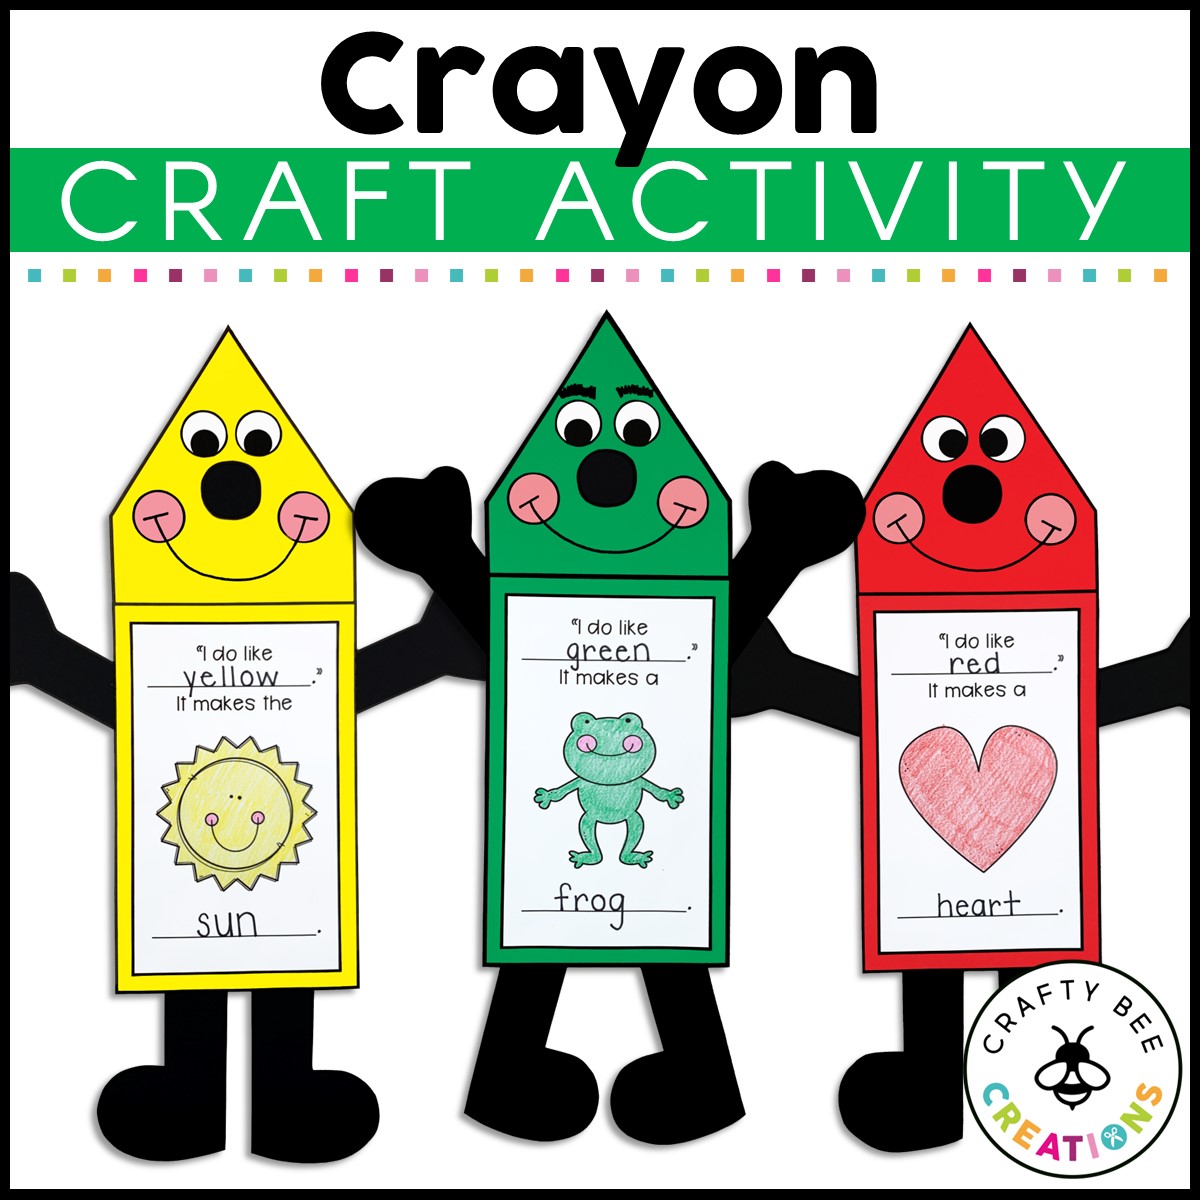 https://craftybeecreations.com/wp-content/uploads/2021/02/The-Crayon-Box-That-Talked-Craft-Square-Cover.jpg